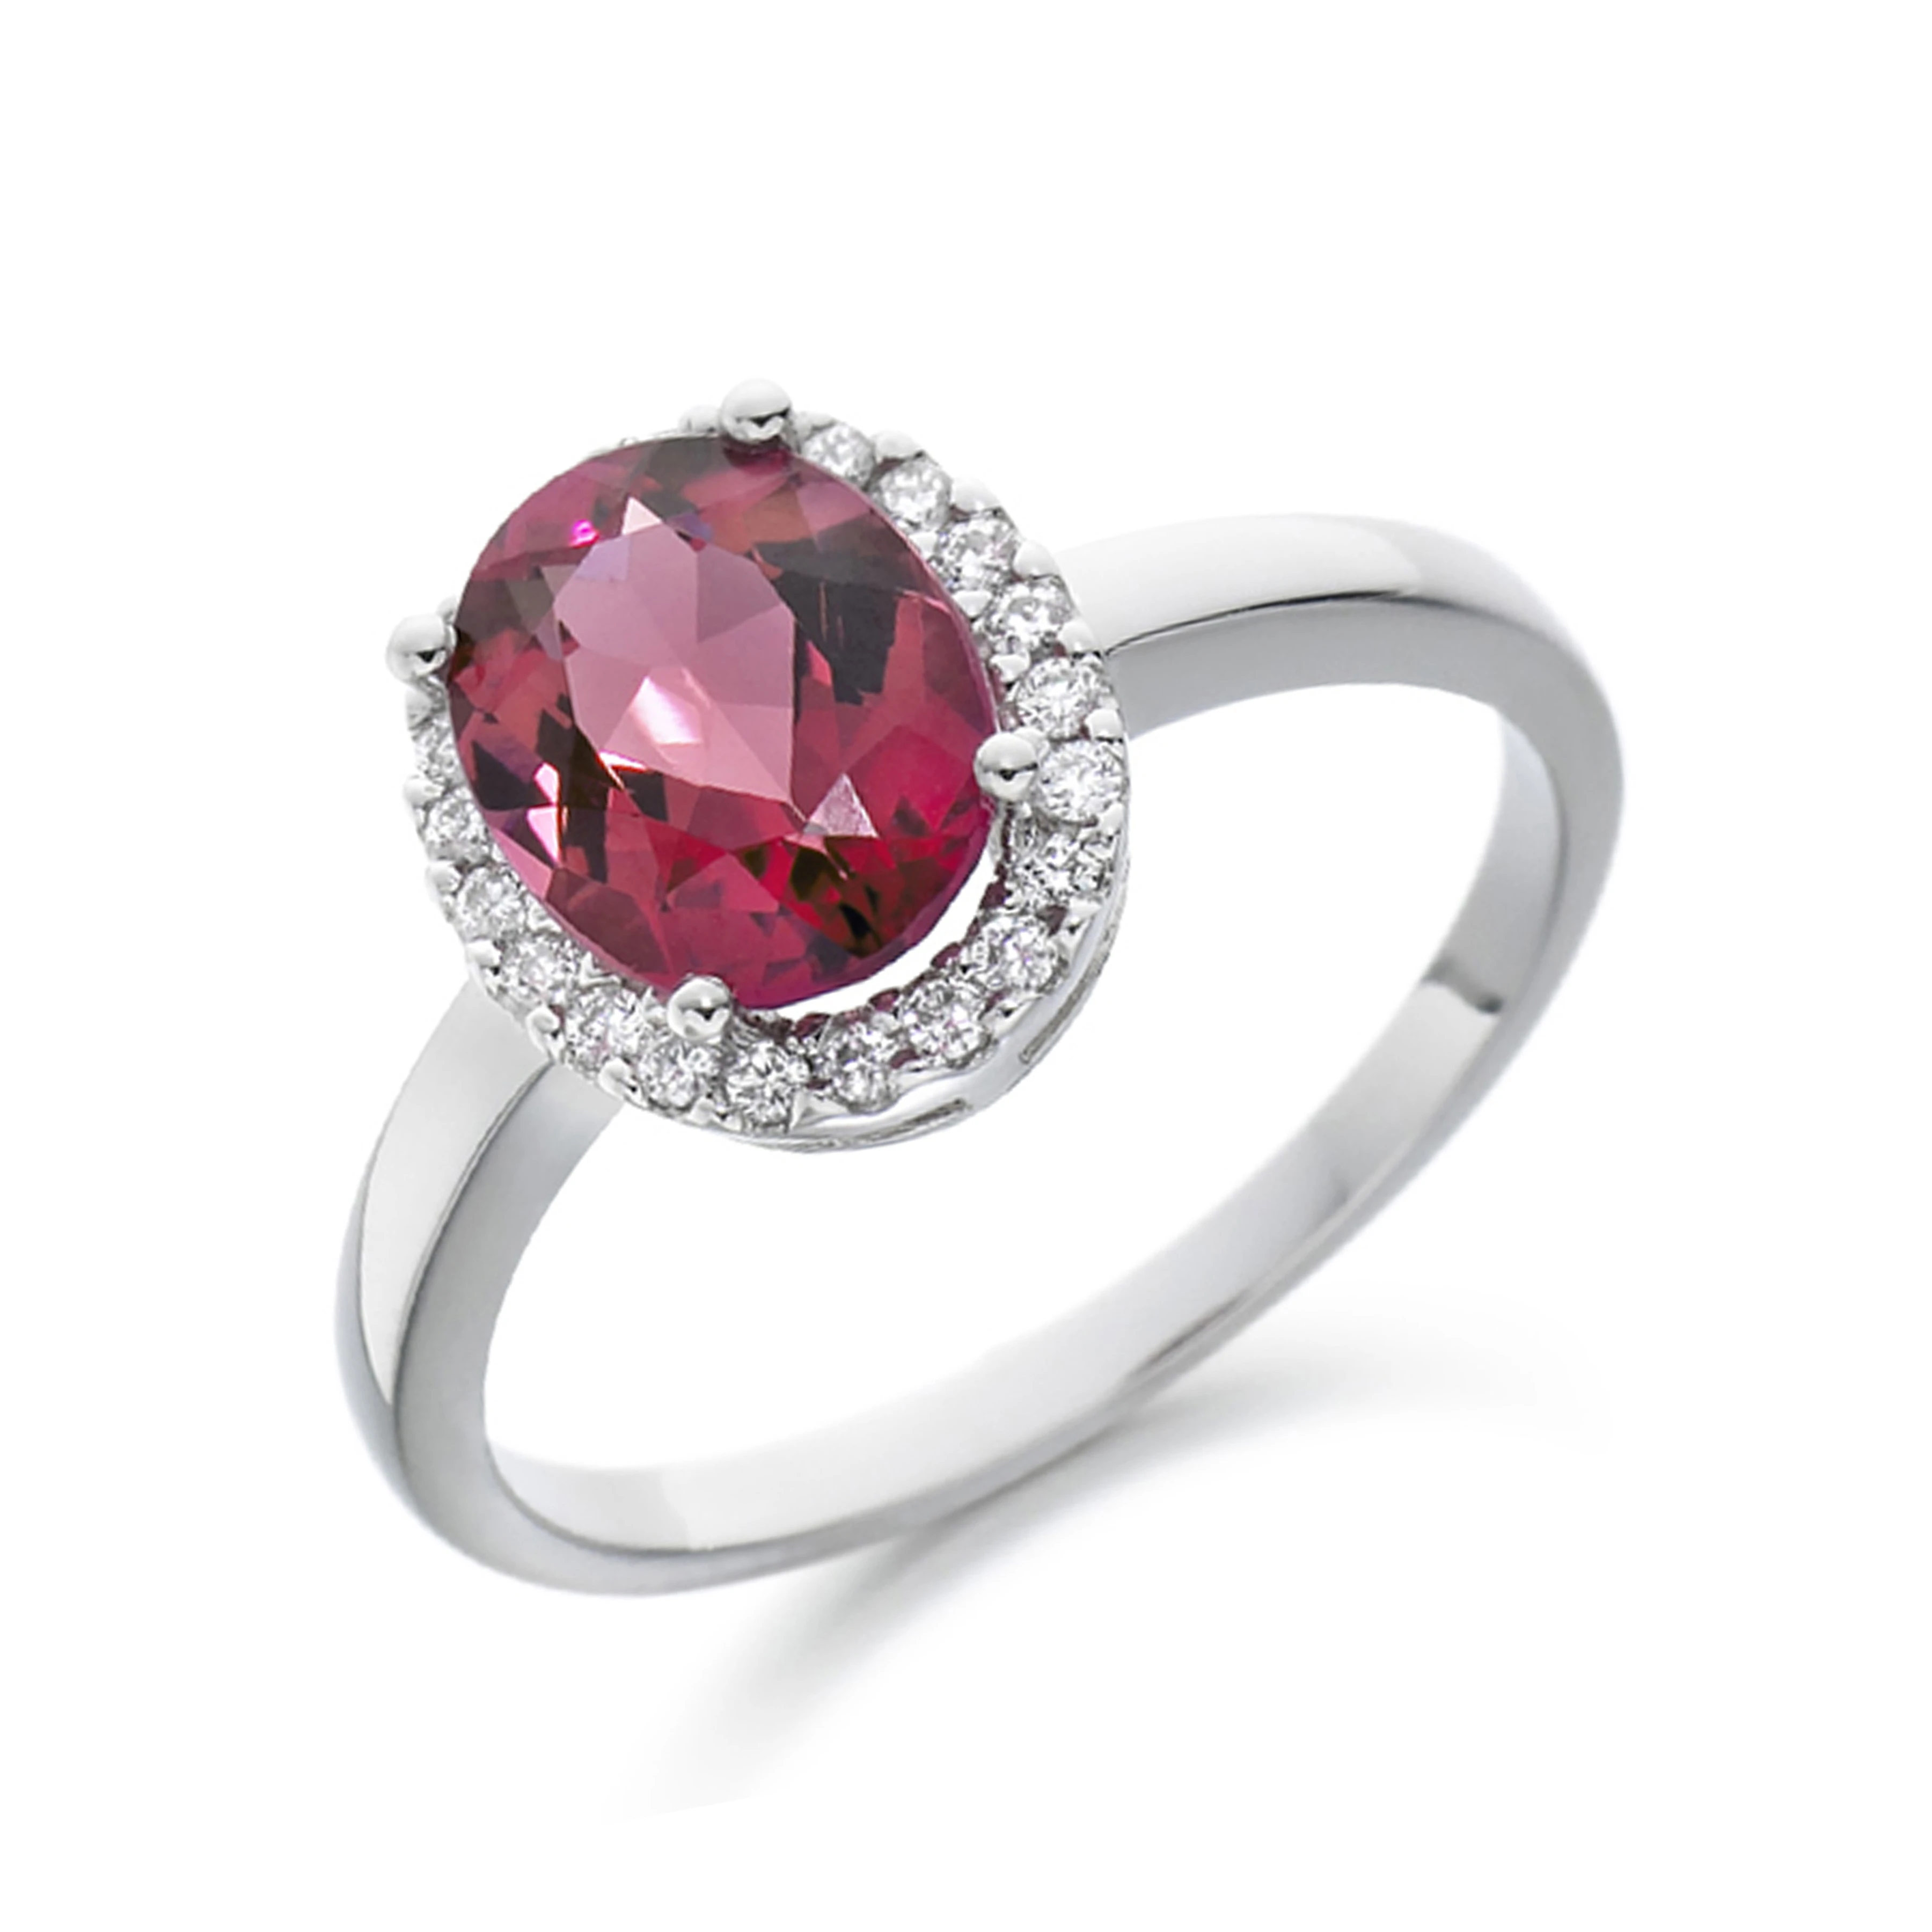 6X4mm Oval Red Tourmaline Stones On Shoulder Diamond And Gemstone Engagement Ring